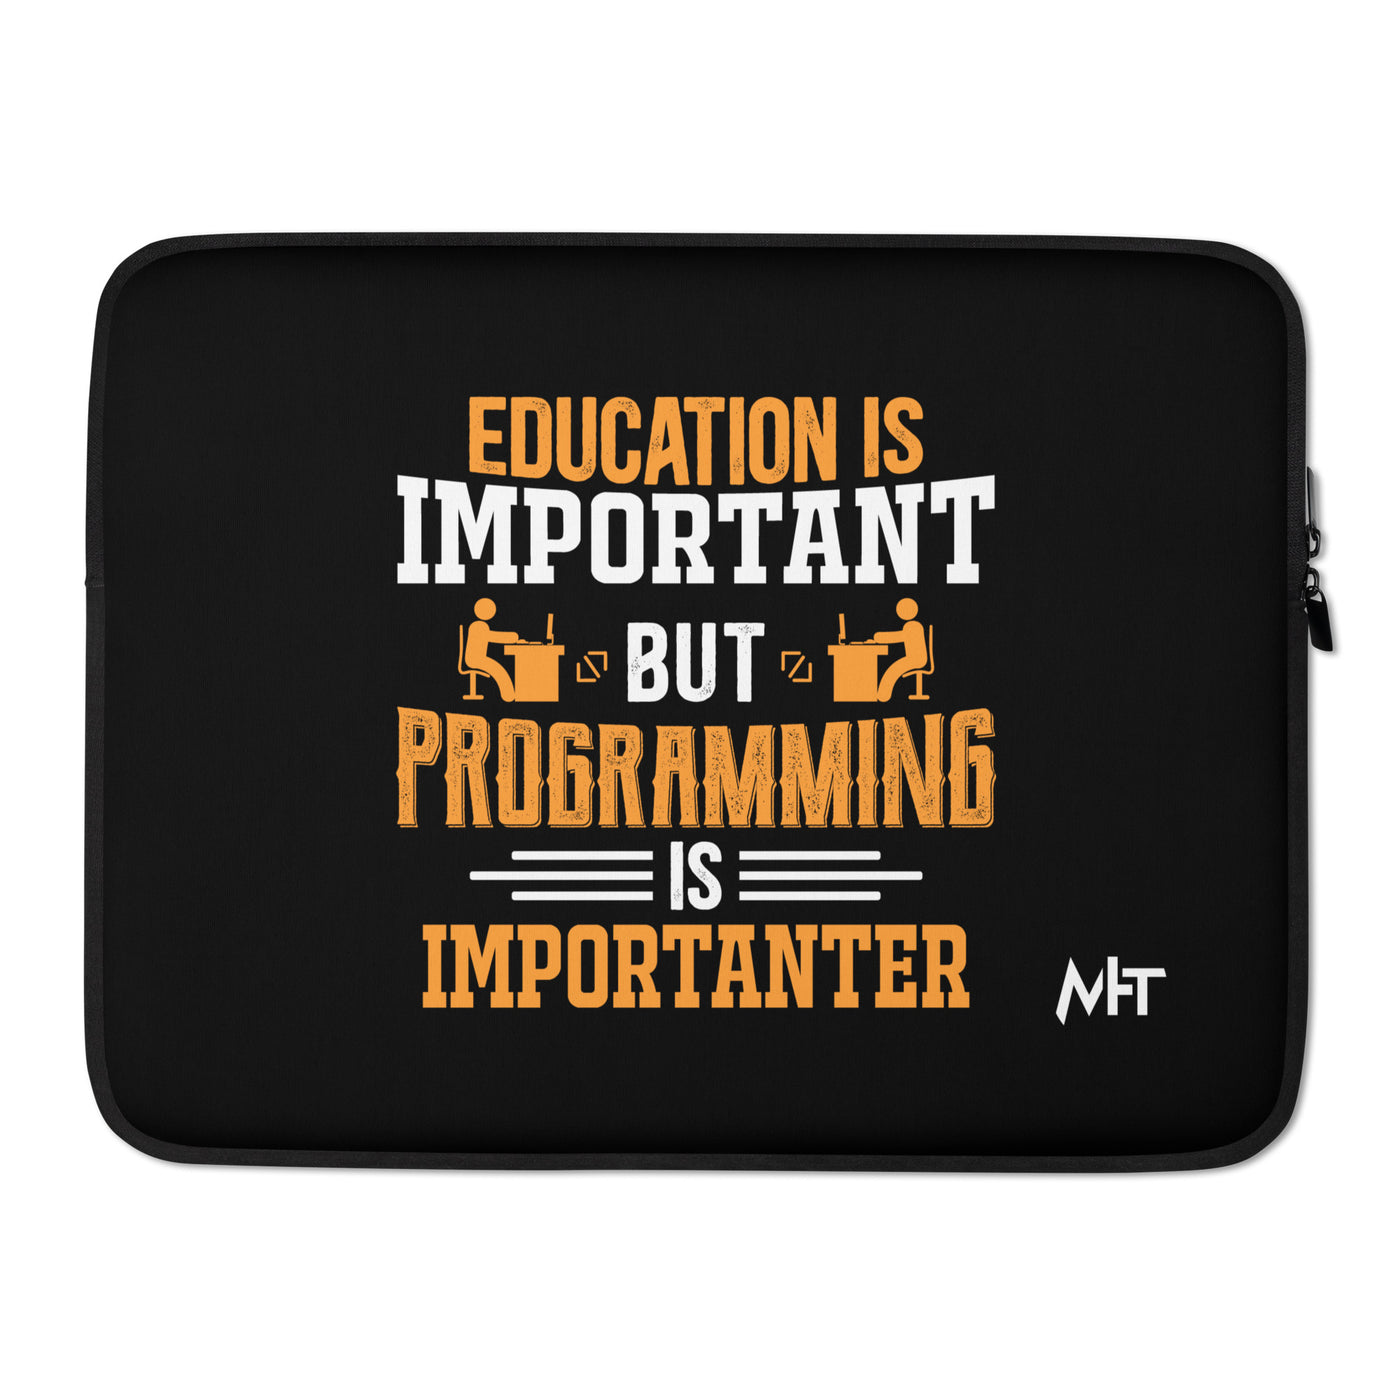 Education is important, but Programming is importanter - Laptop Sleeve